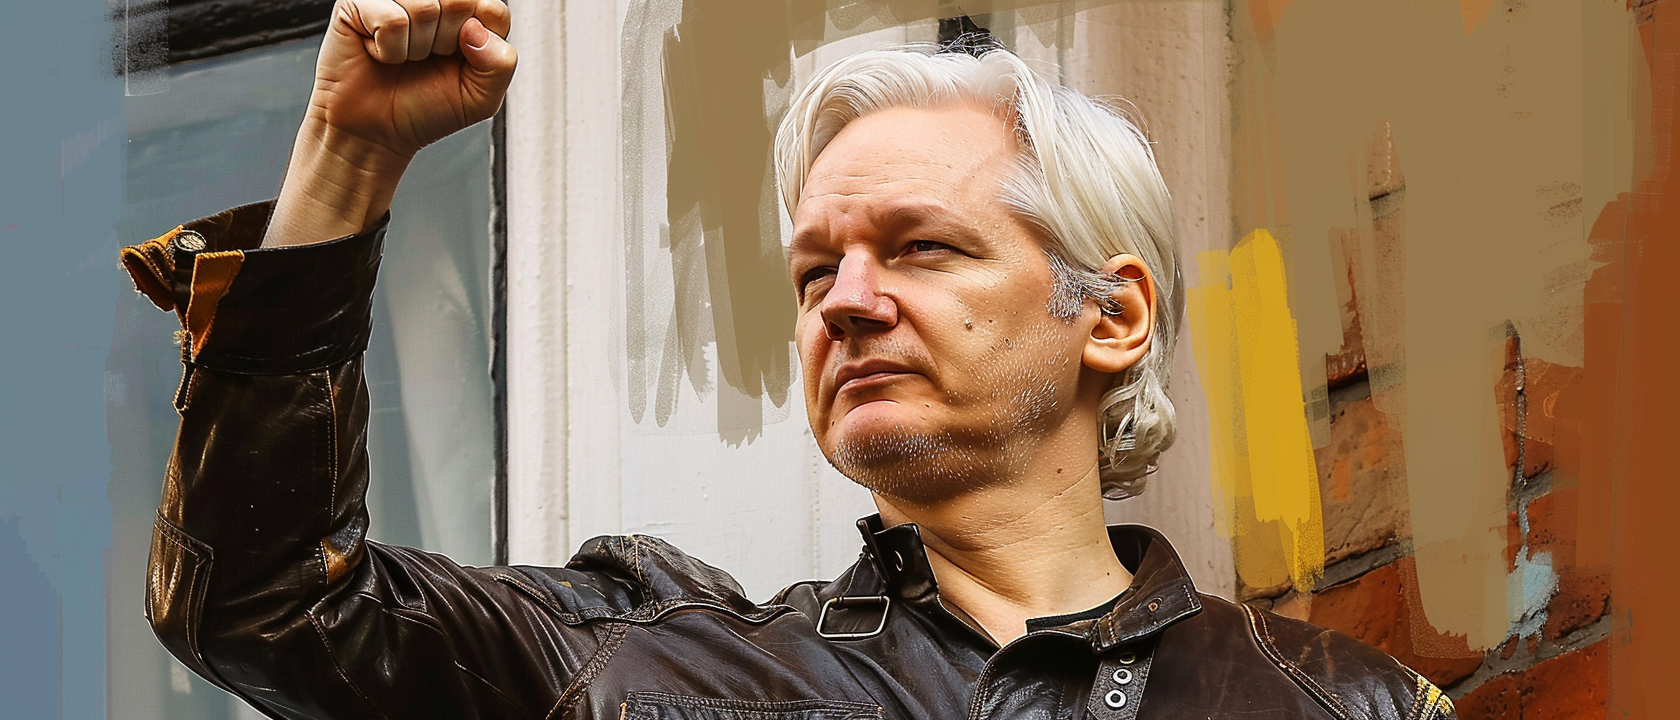 Julian Assange Released from UK Prison, Agrees to Plead Guilty in US Espionage Case